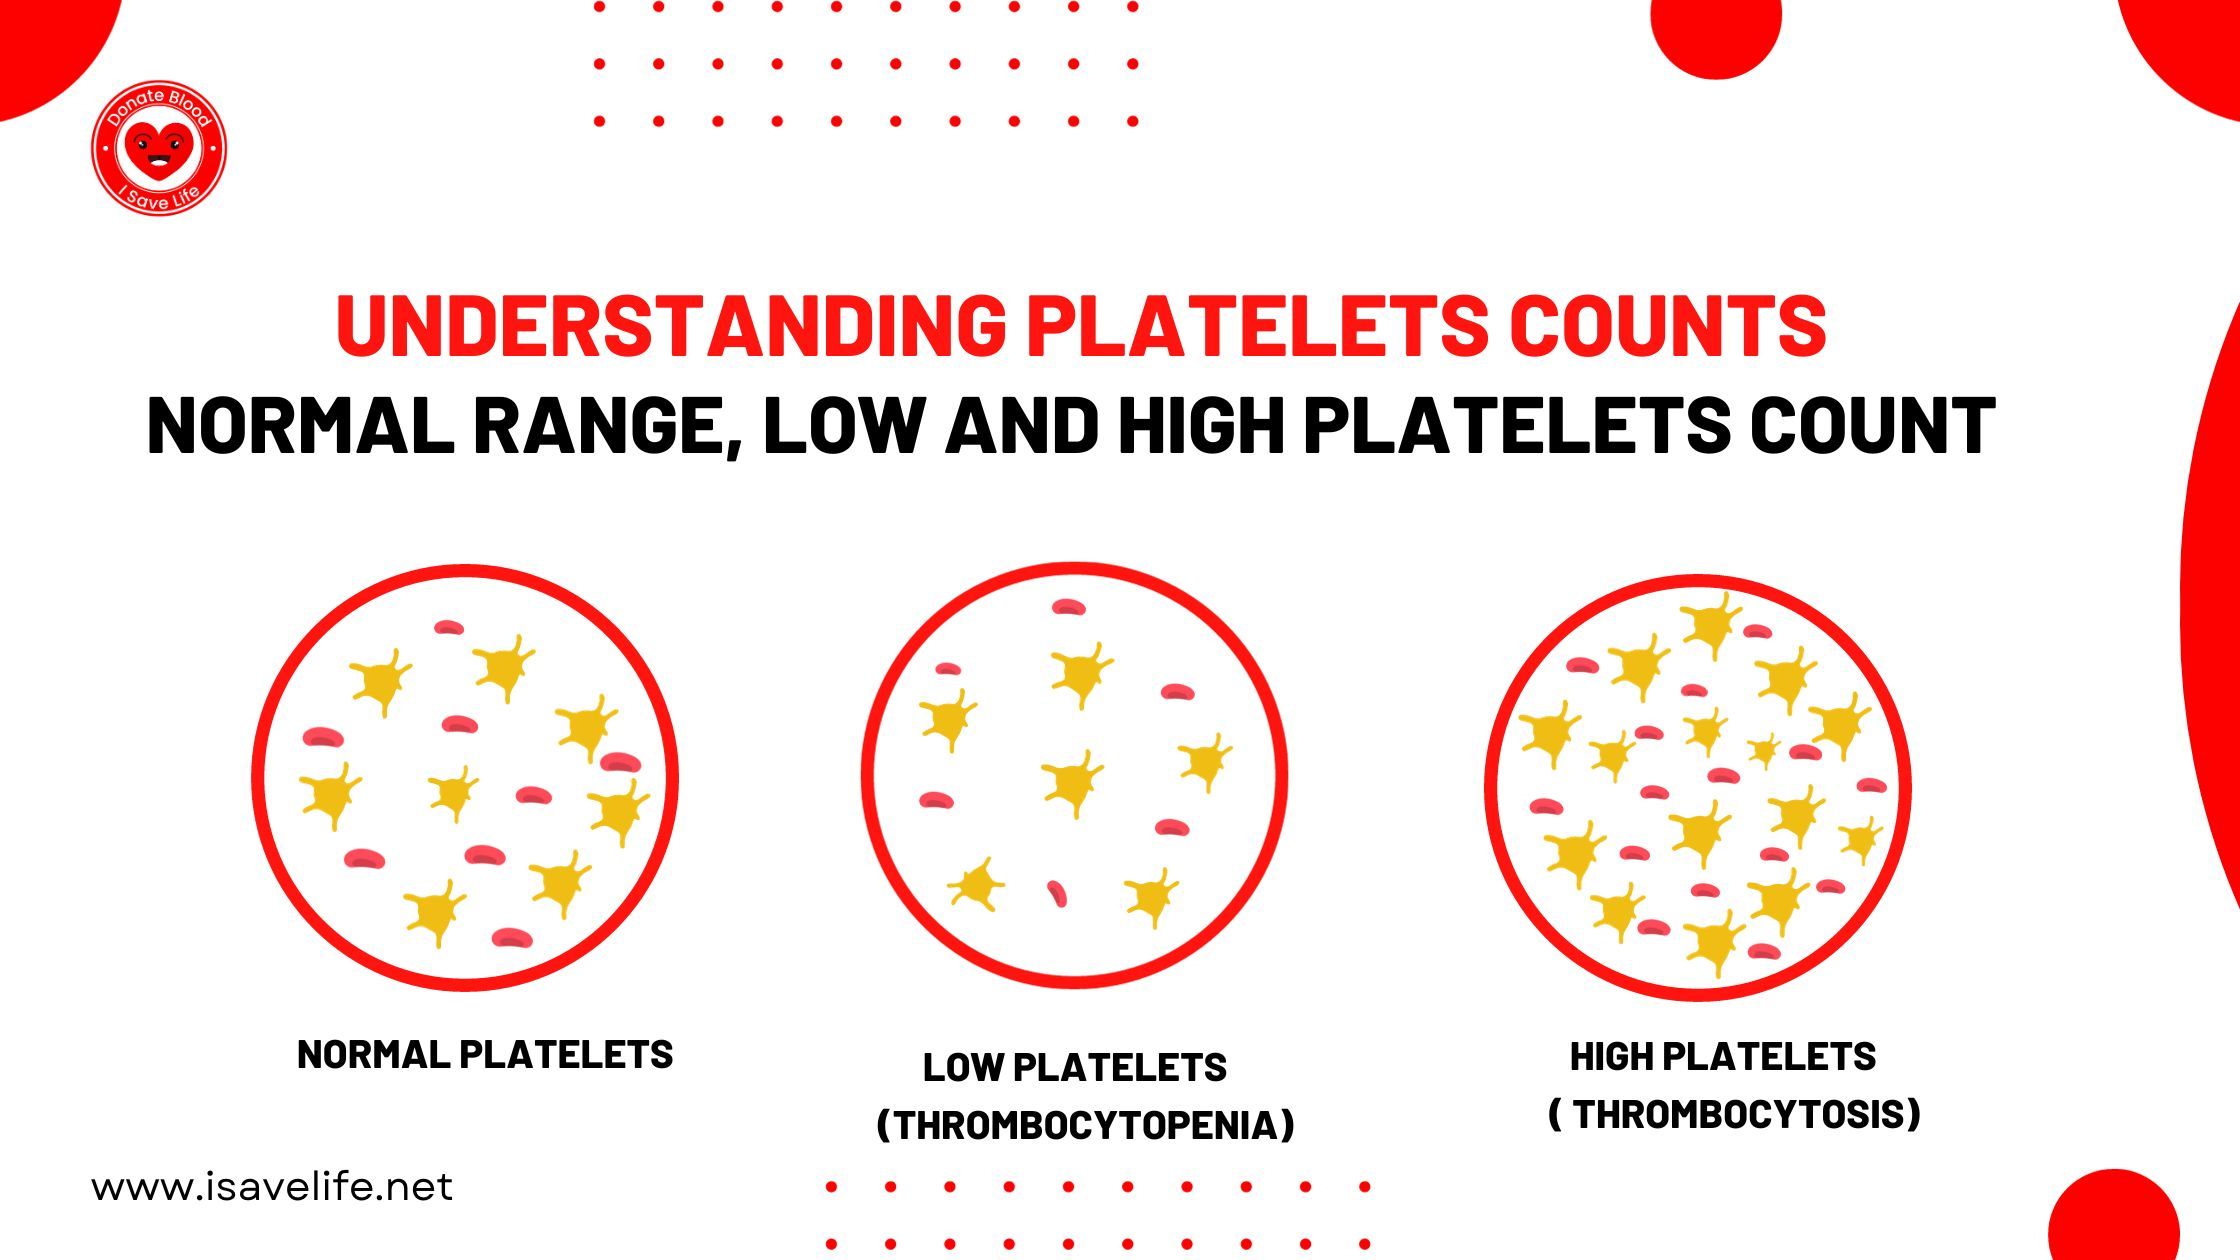 Understanding Platelets Counts: Normal Range, Low and High Platelets Count